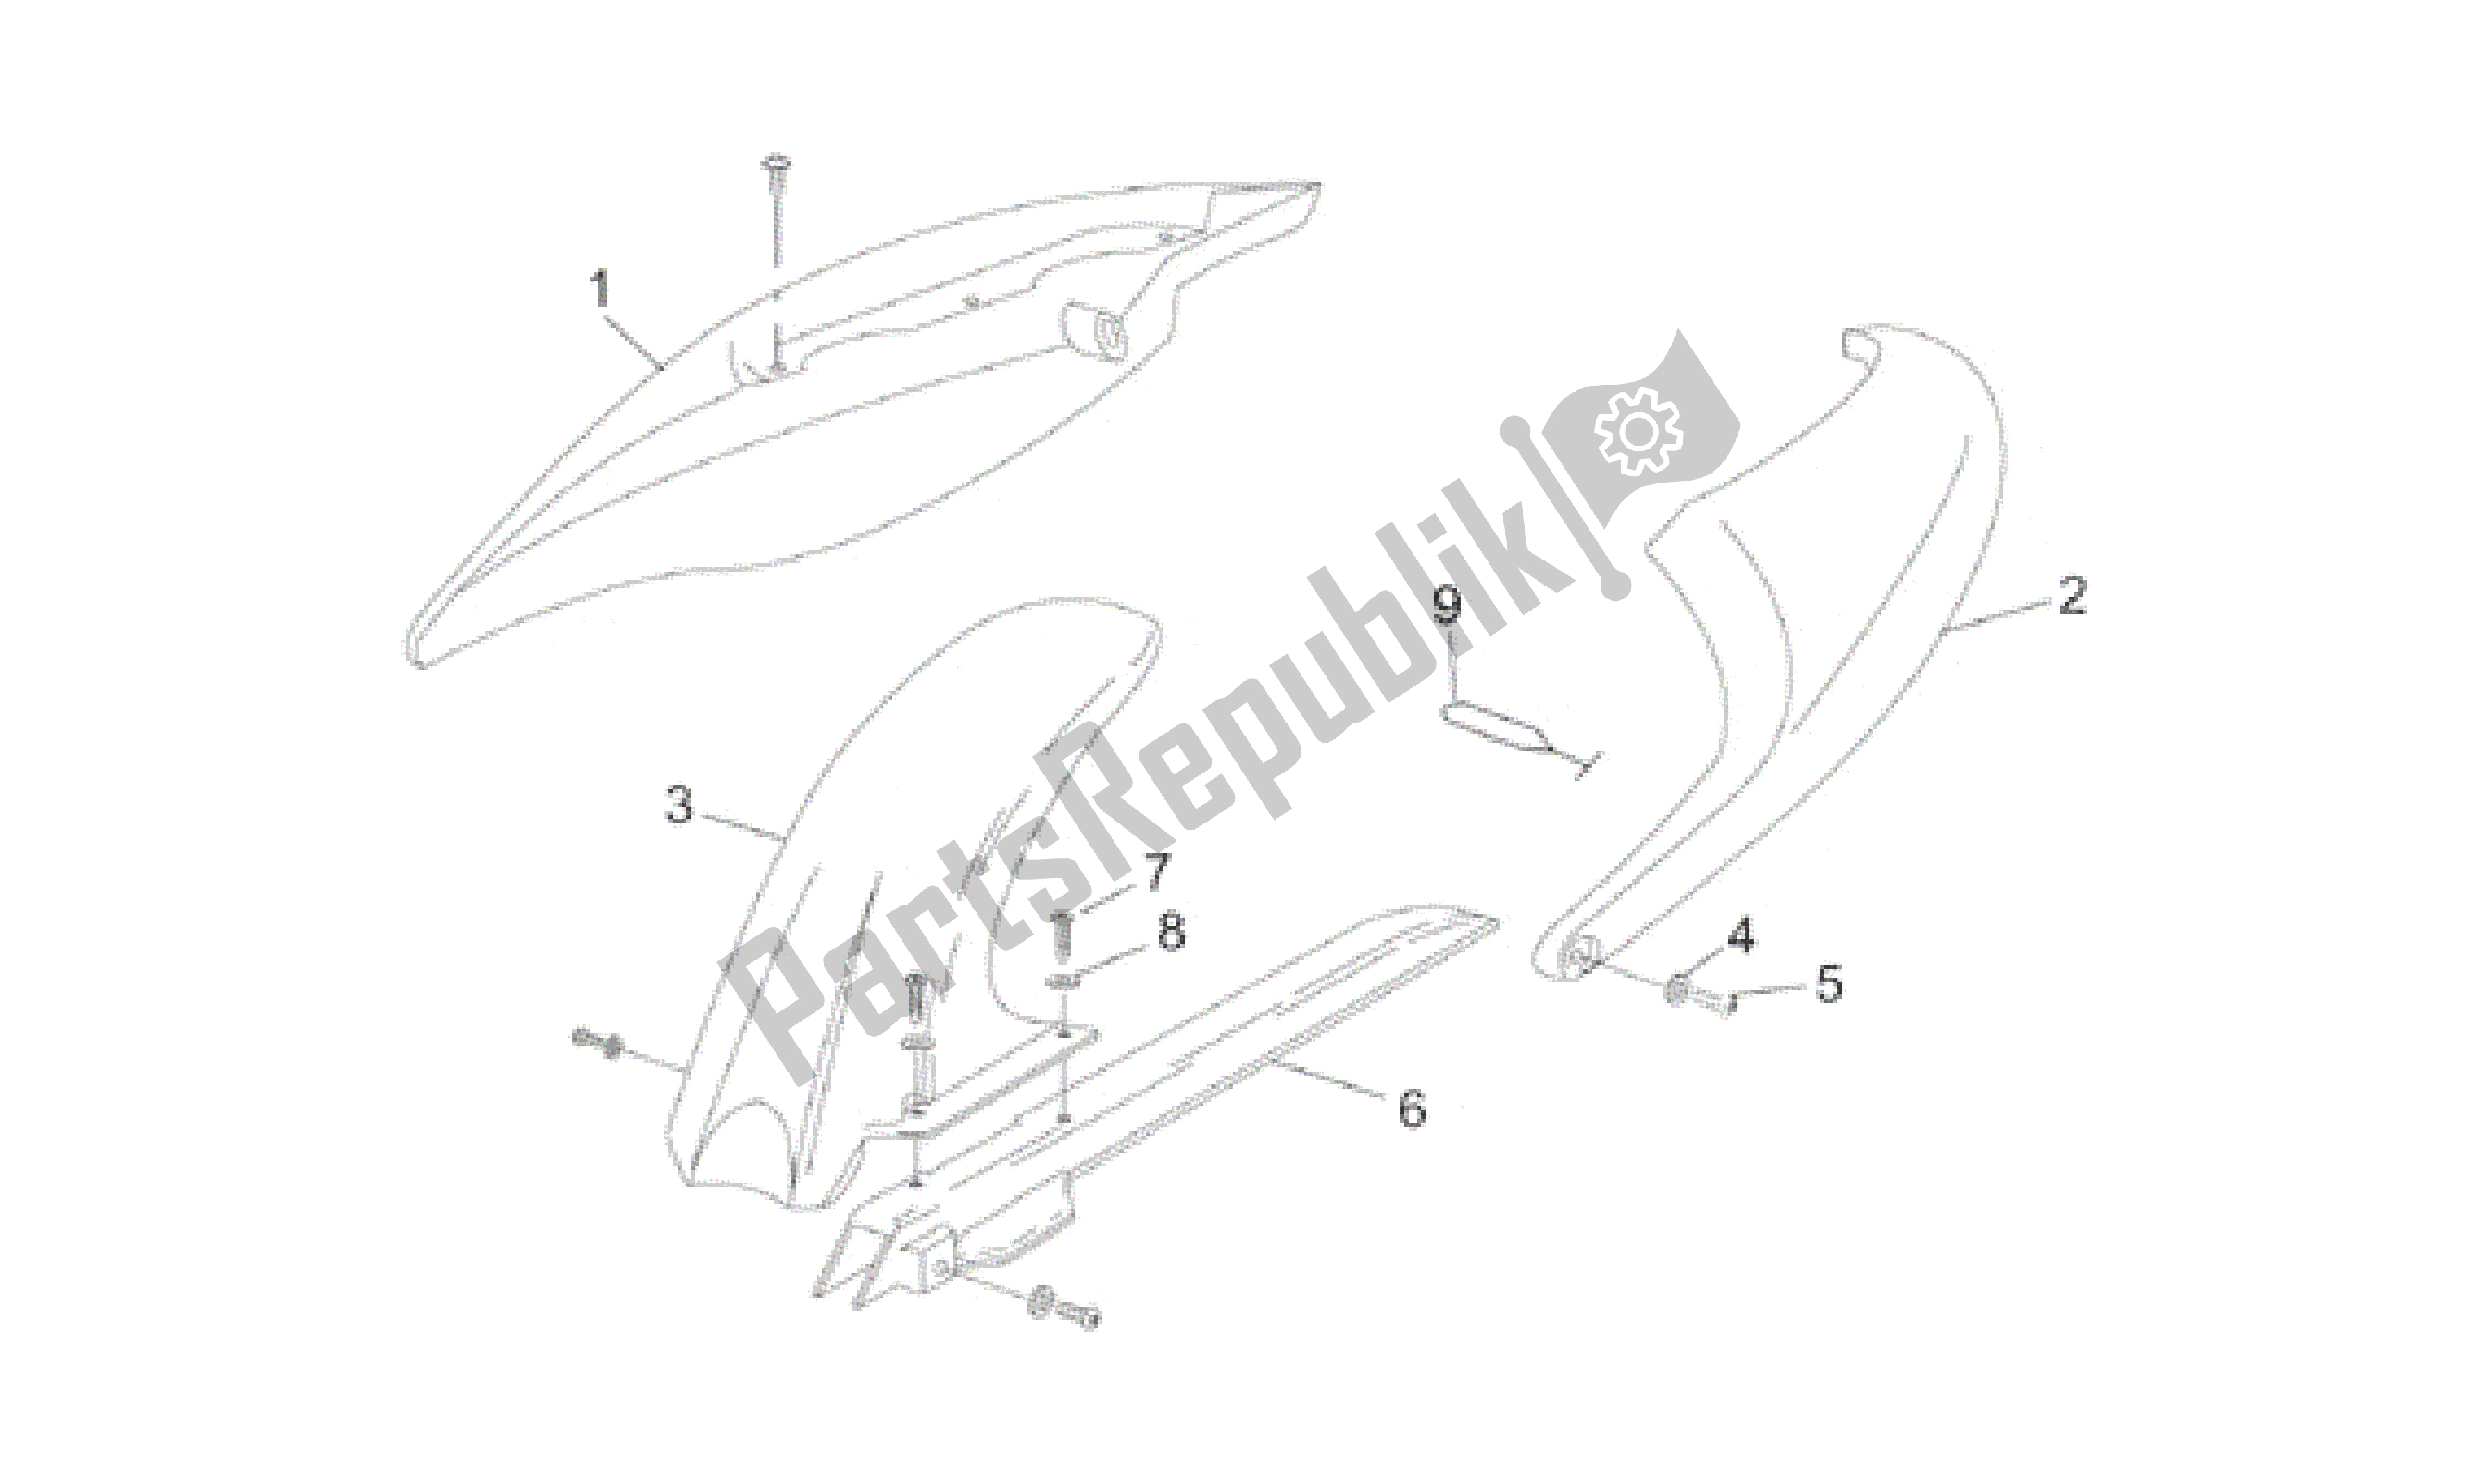 All parts for the Rear Body Iii of the Aprilia RS 50 1996 - 1998